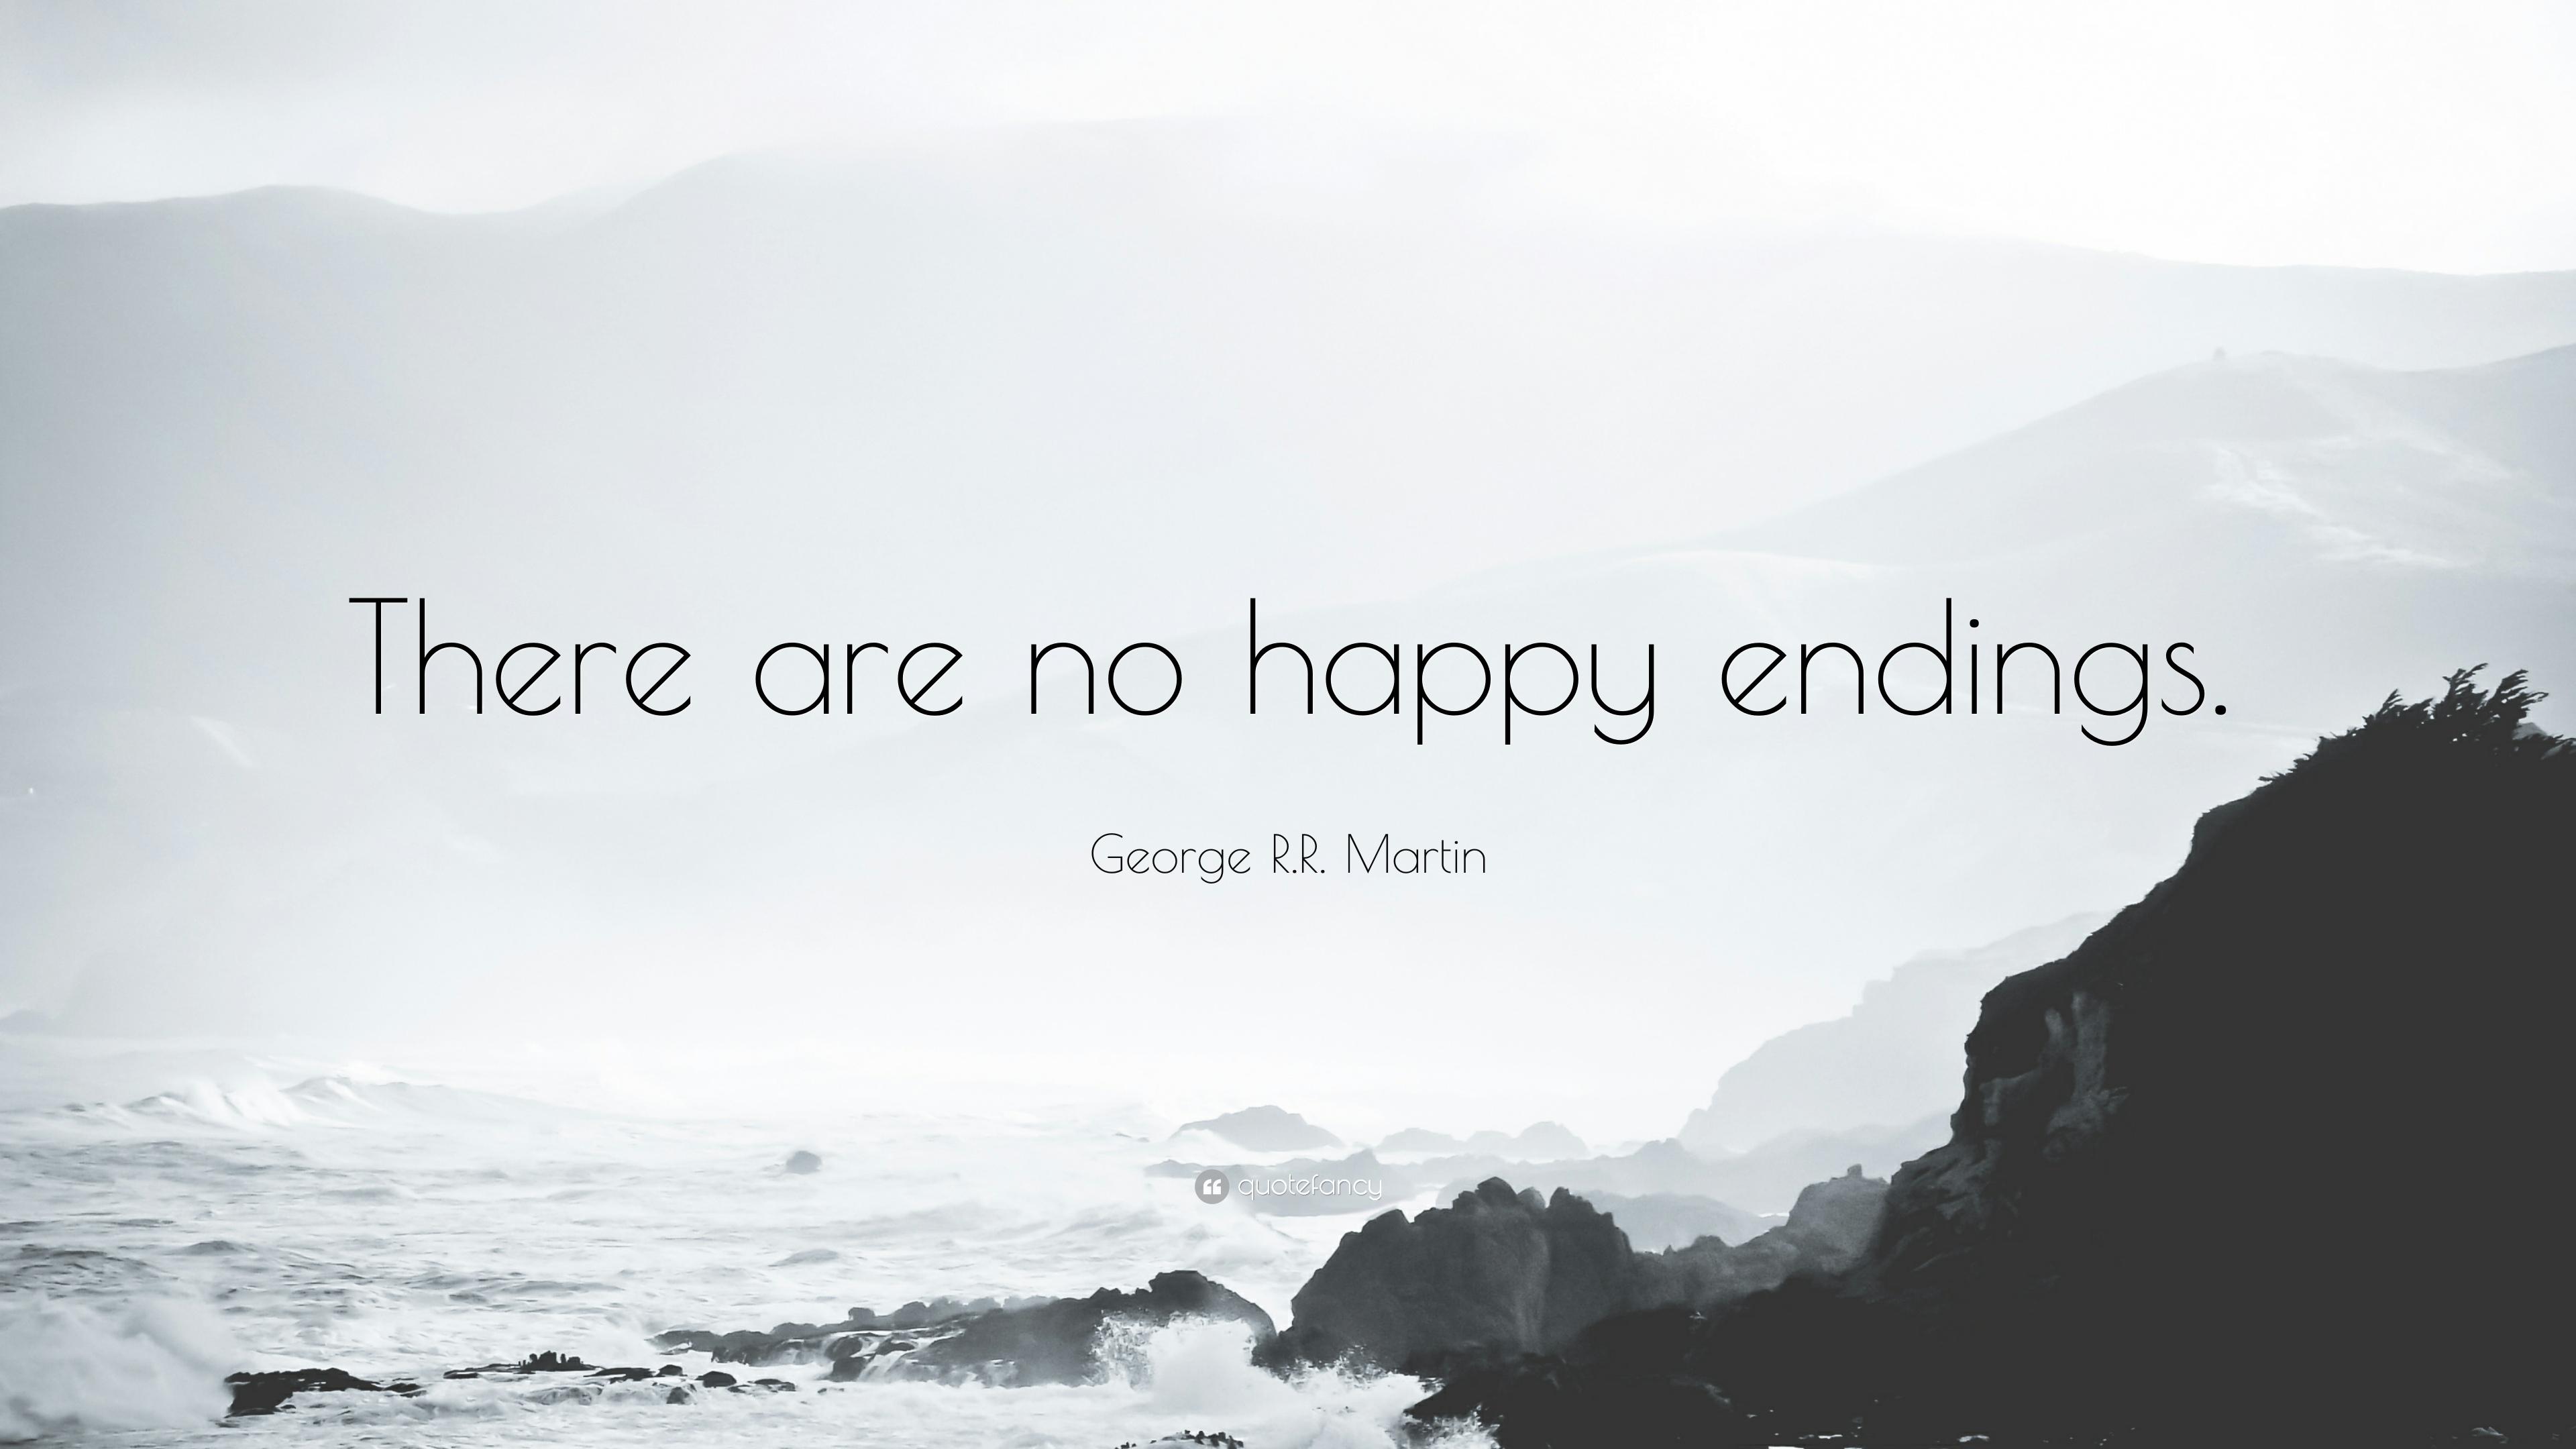 George R.R. Martin Quote: “There are no happy endings.” 12